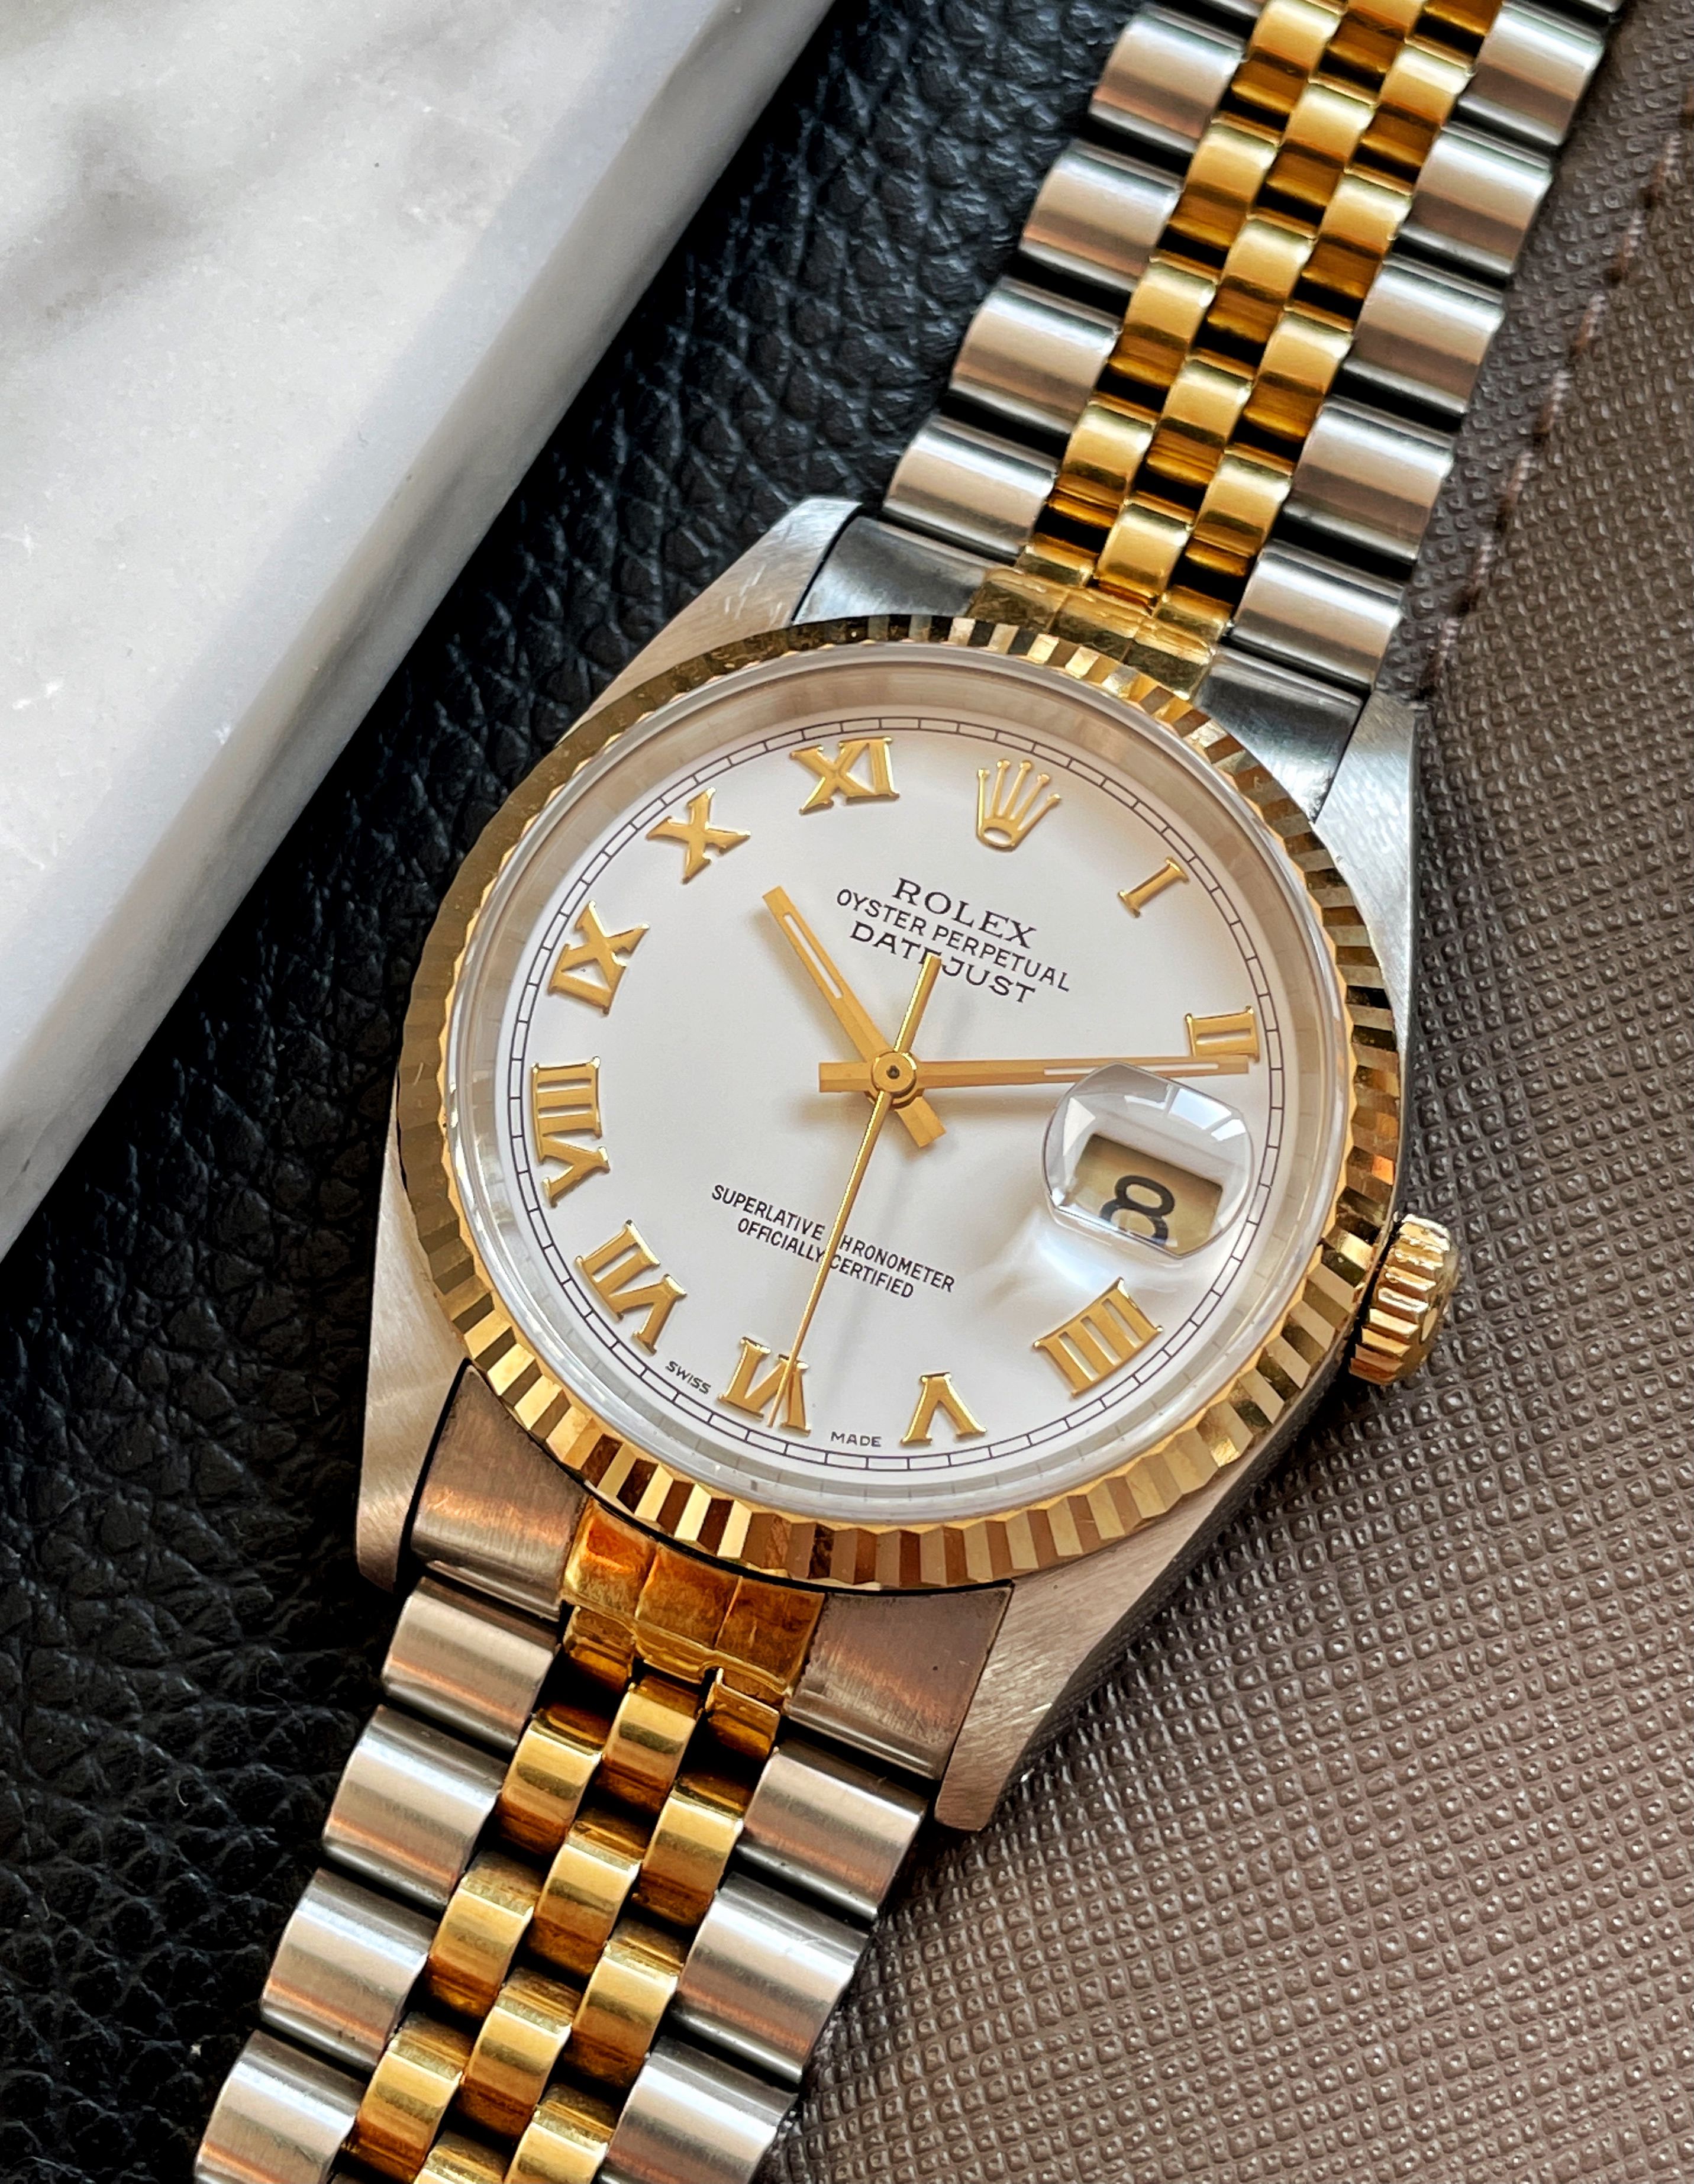 Rolex Datejust 16233 White 1991 with original box and papers